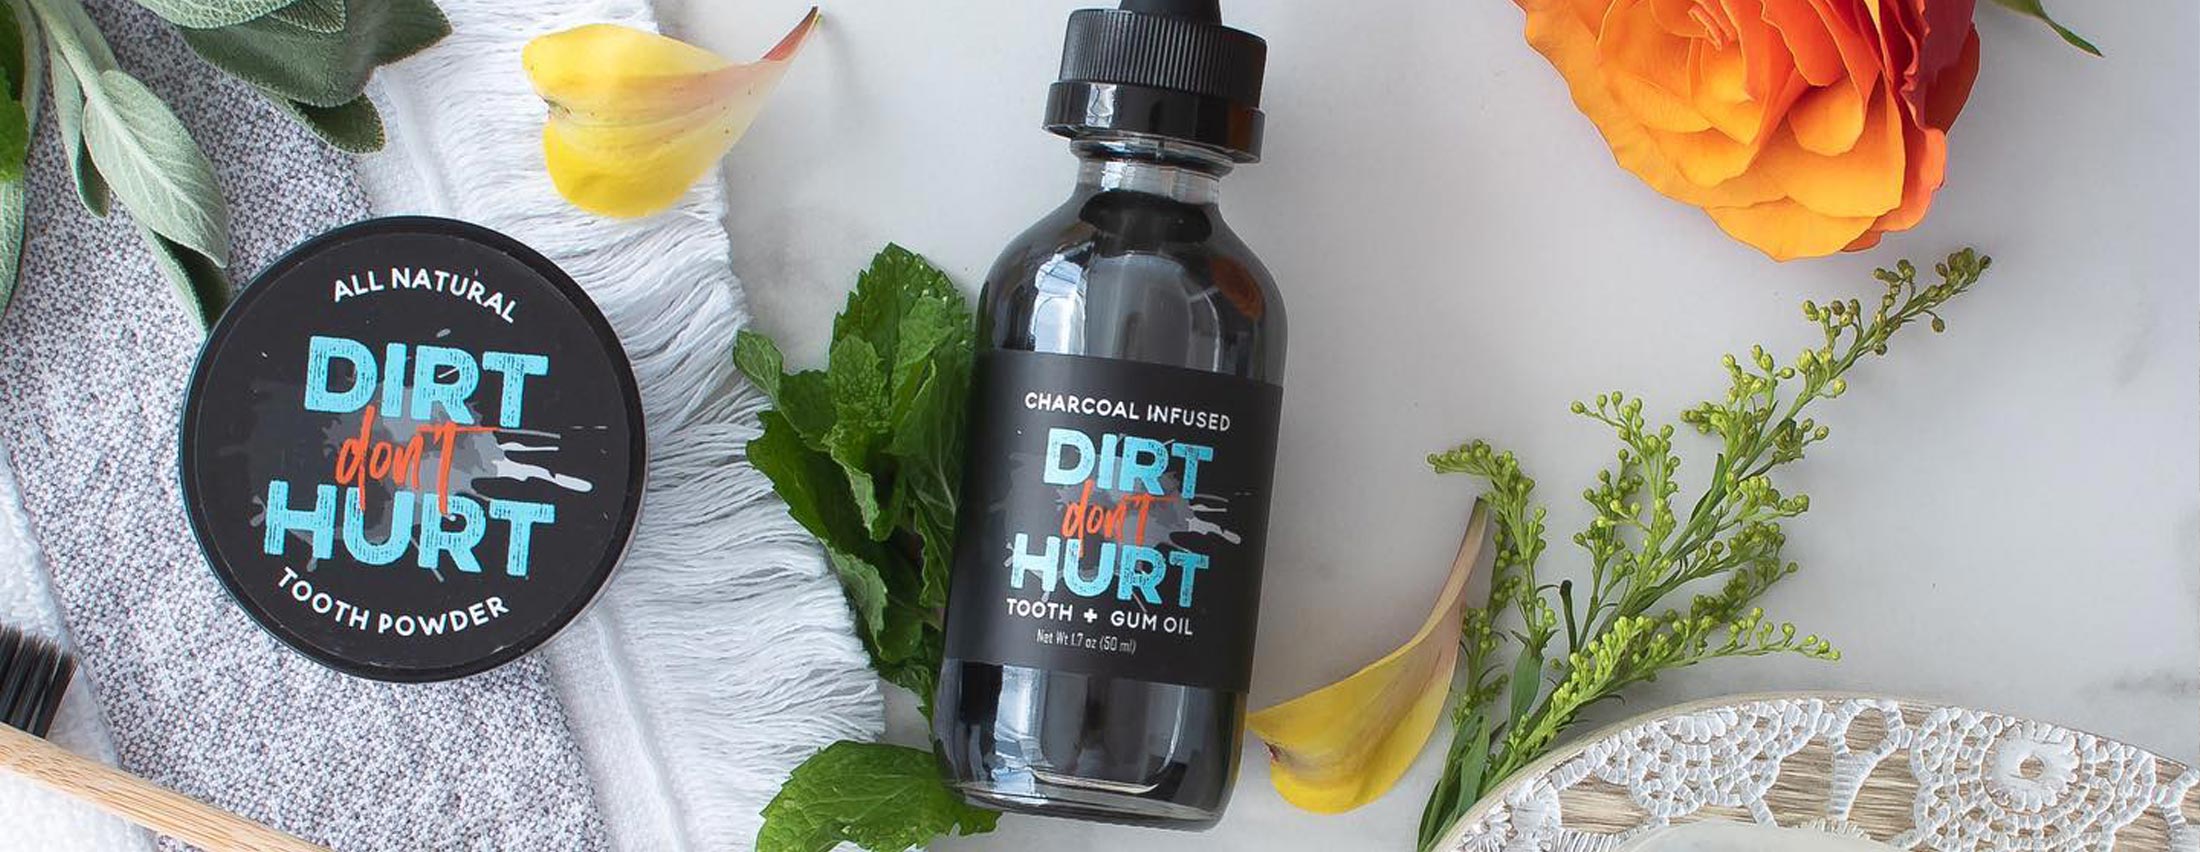 Dirt Don't Hurt Me | Earth and Plant Based Products